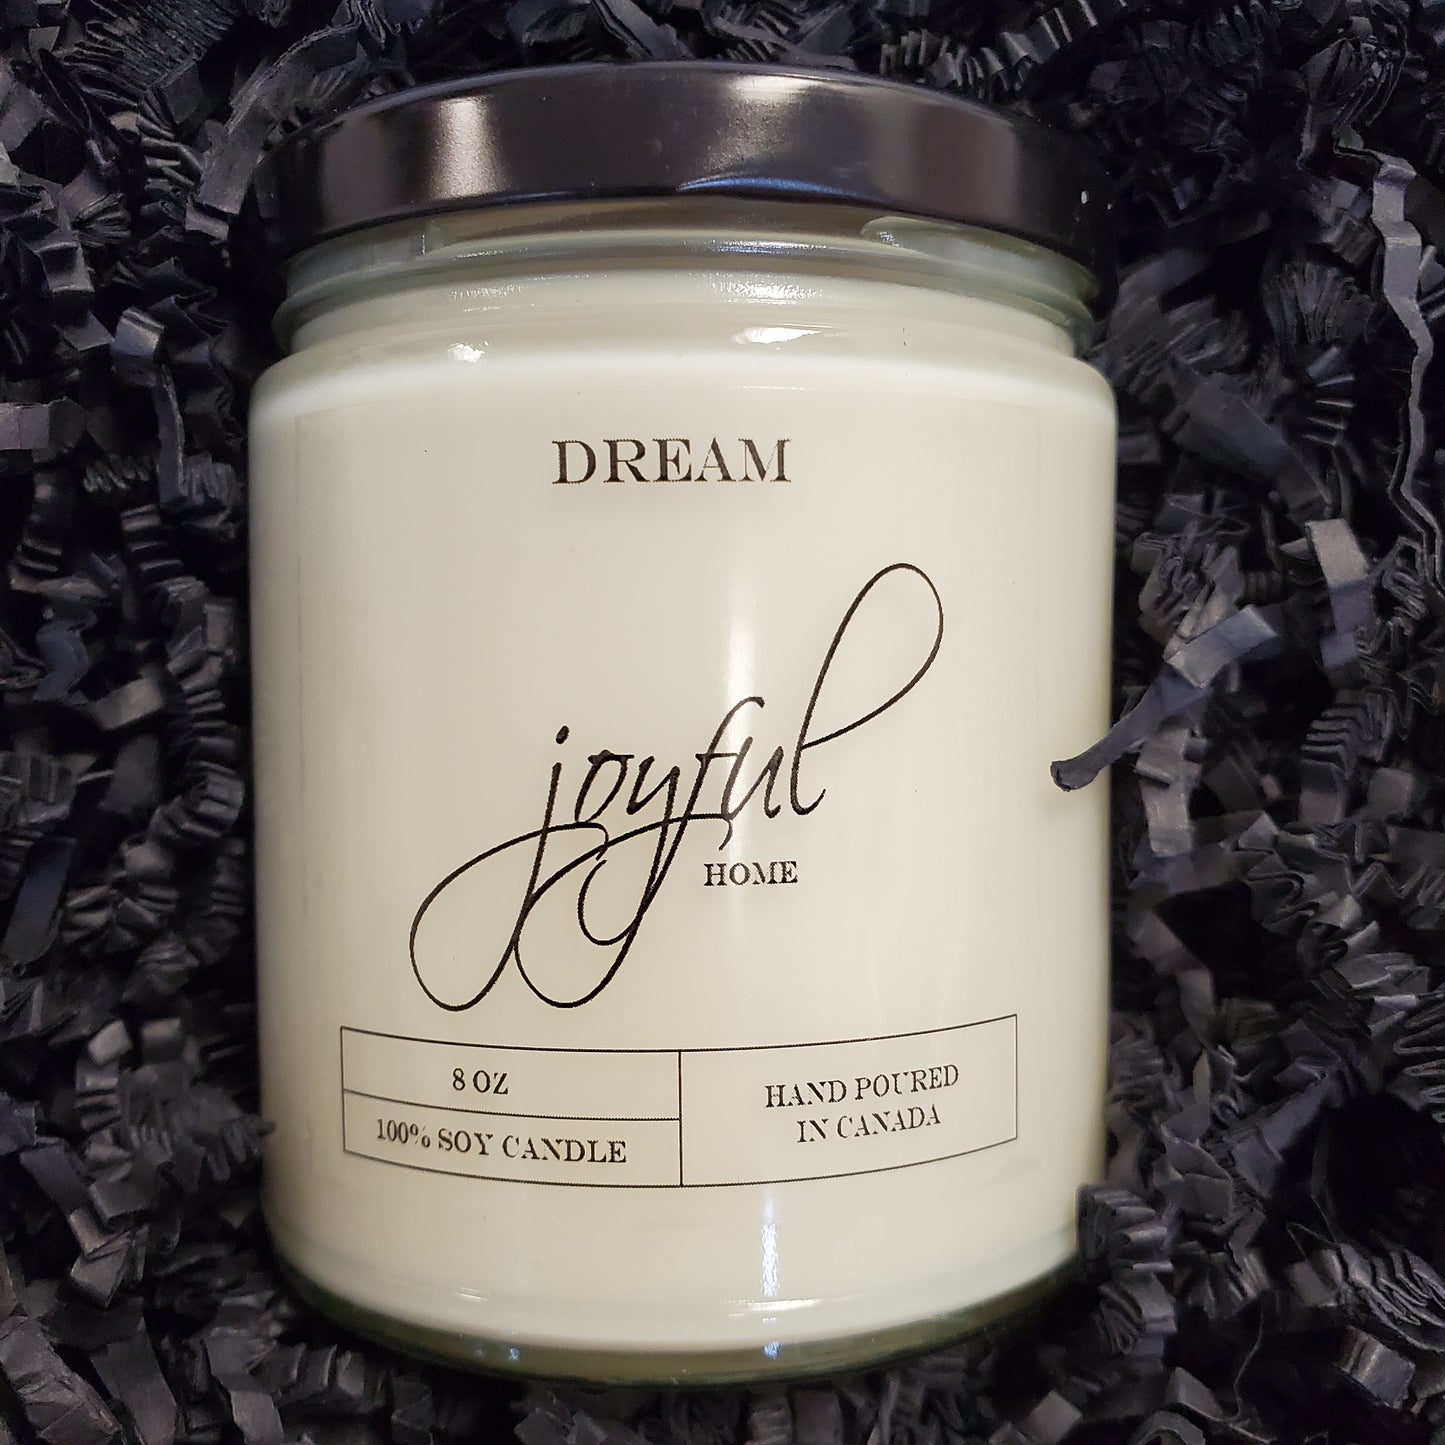 Dream Soy Wax Candles & Soy Wax Melts